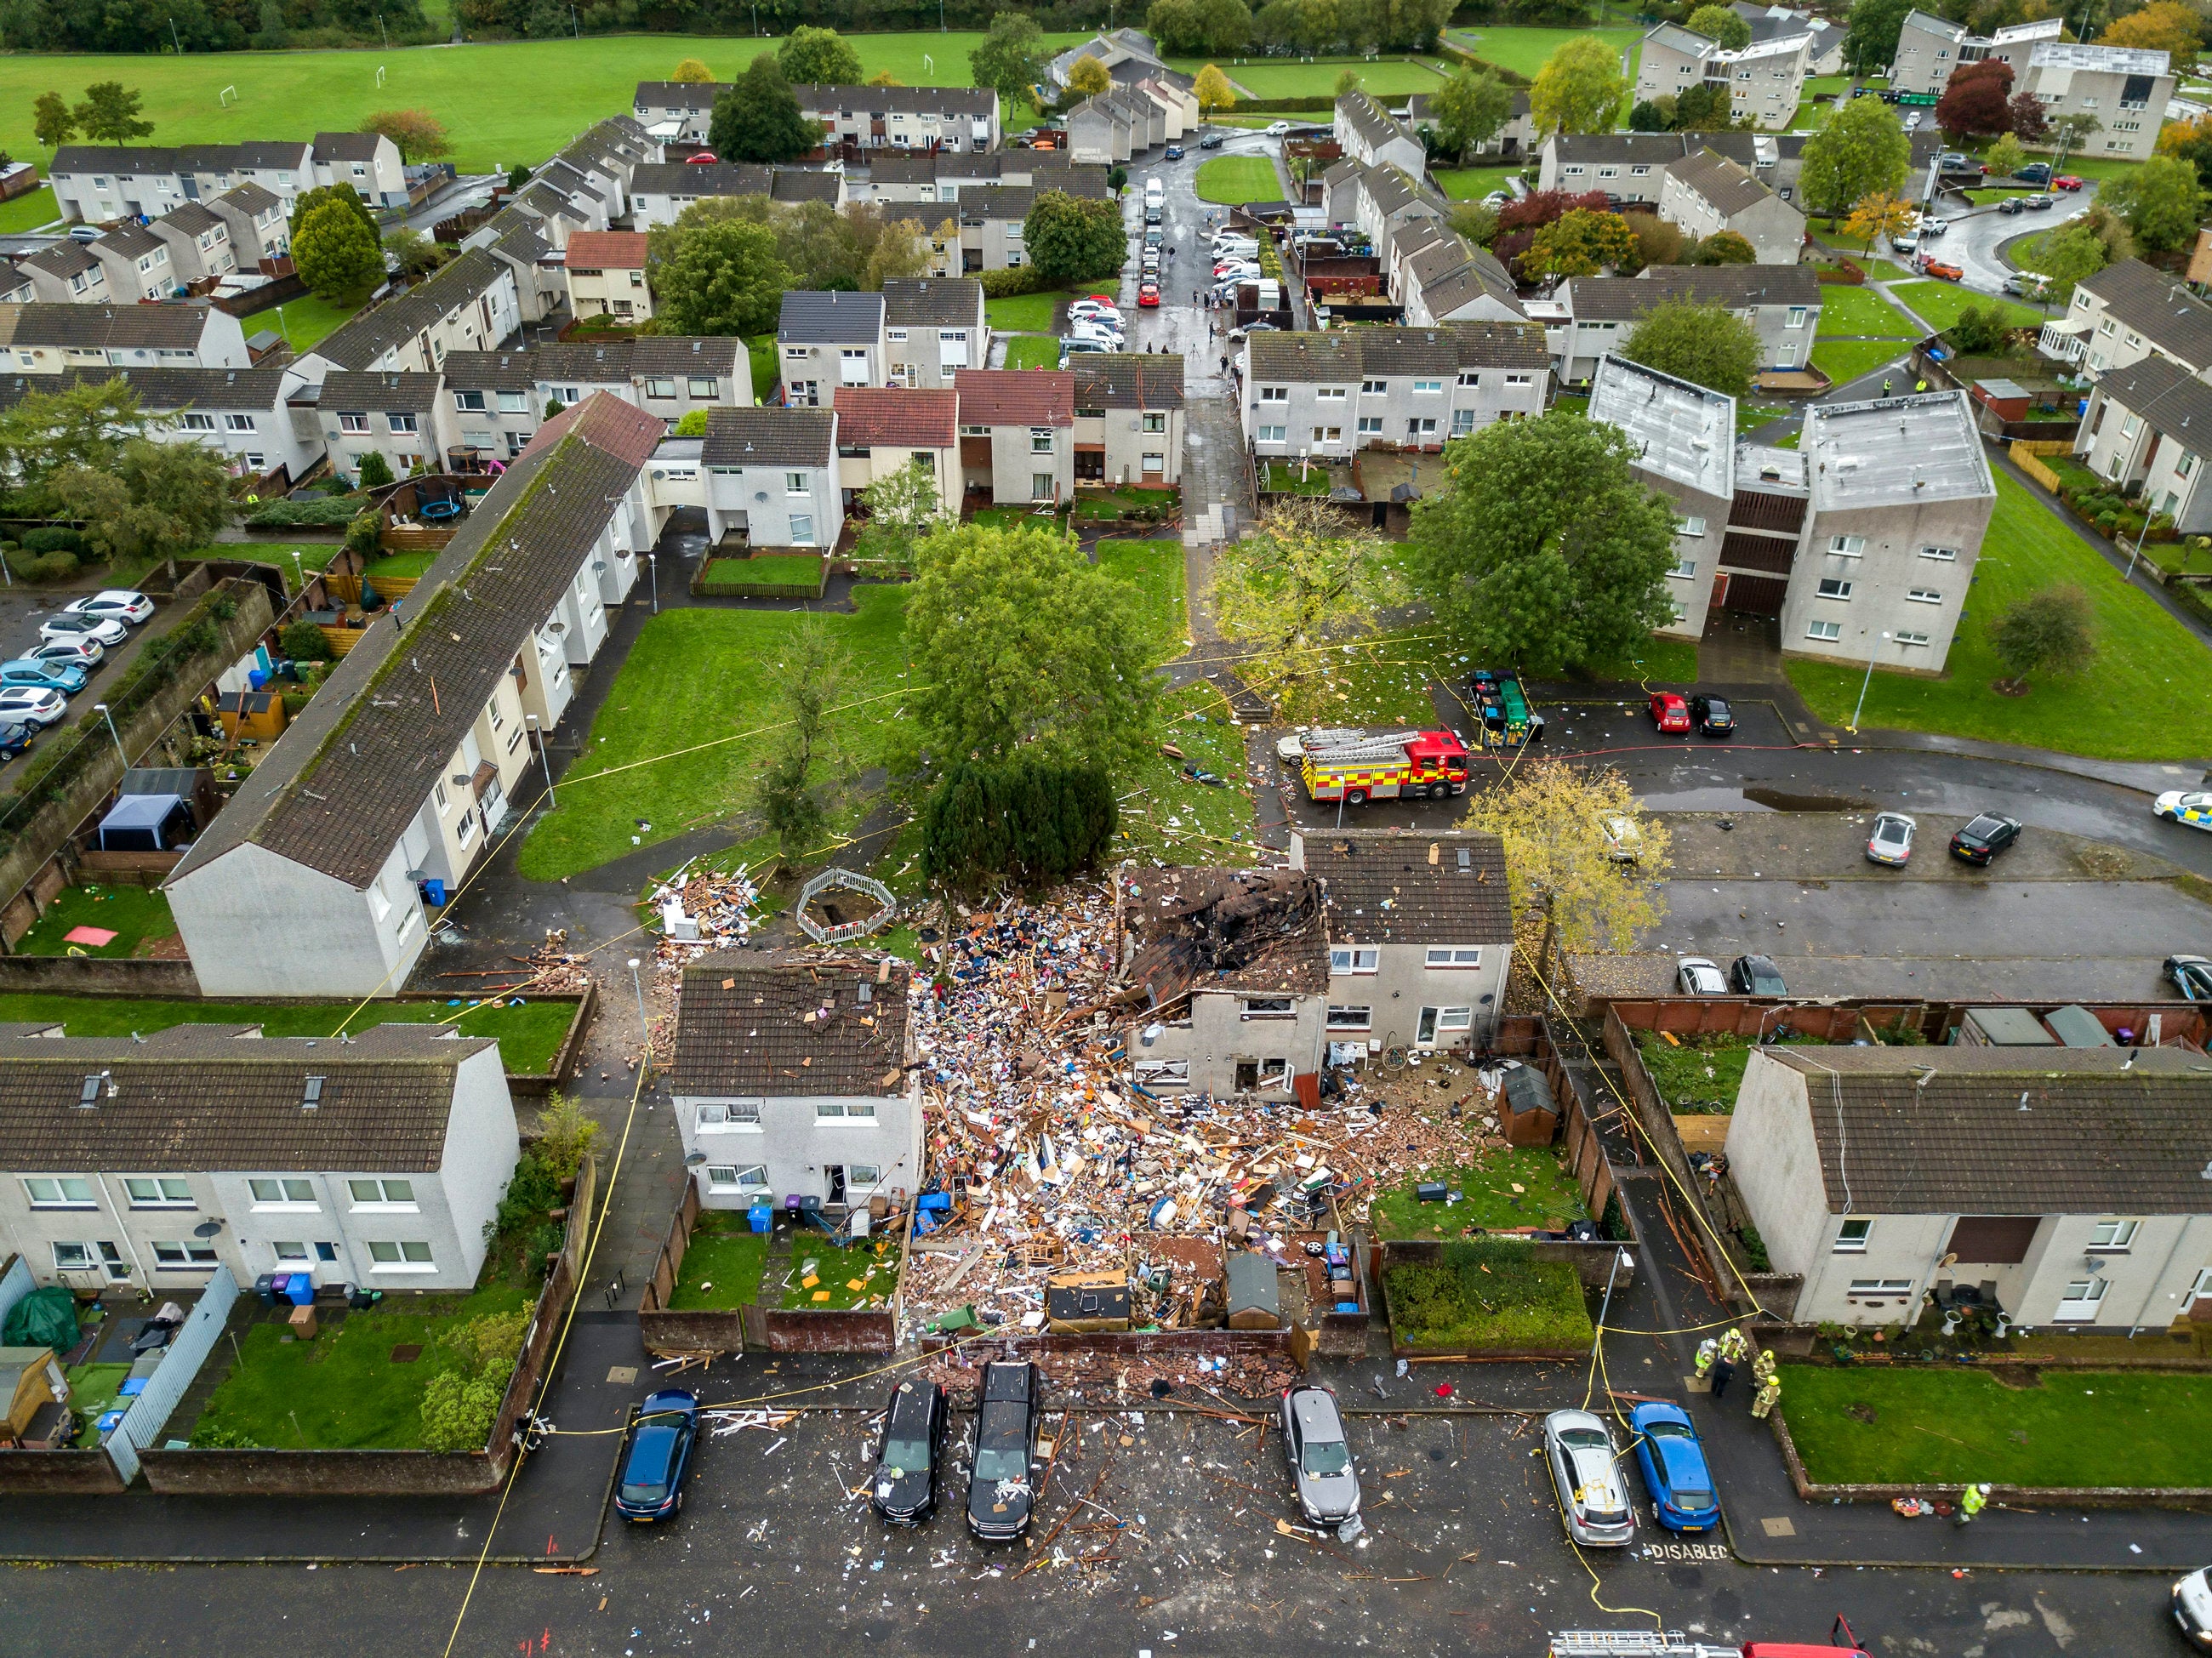 The scene of the blast in Ayr shows a house raised to the ground after a suspected gas explosion